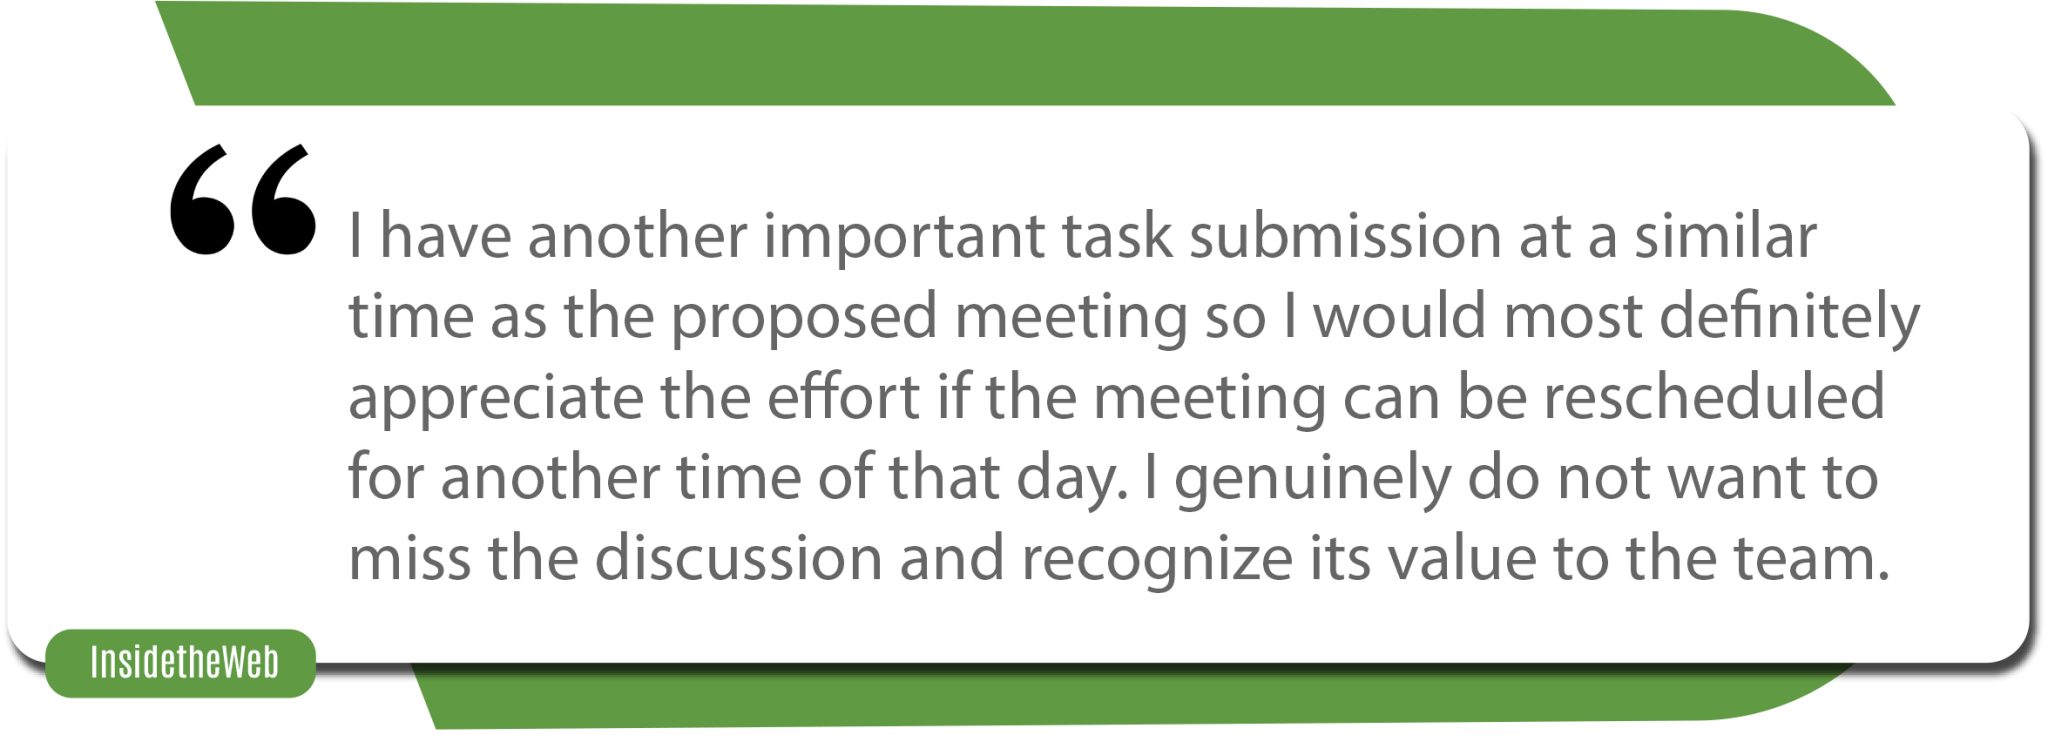 15 Ways to Politely Decline a Meeting (With Examples)